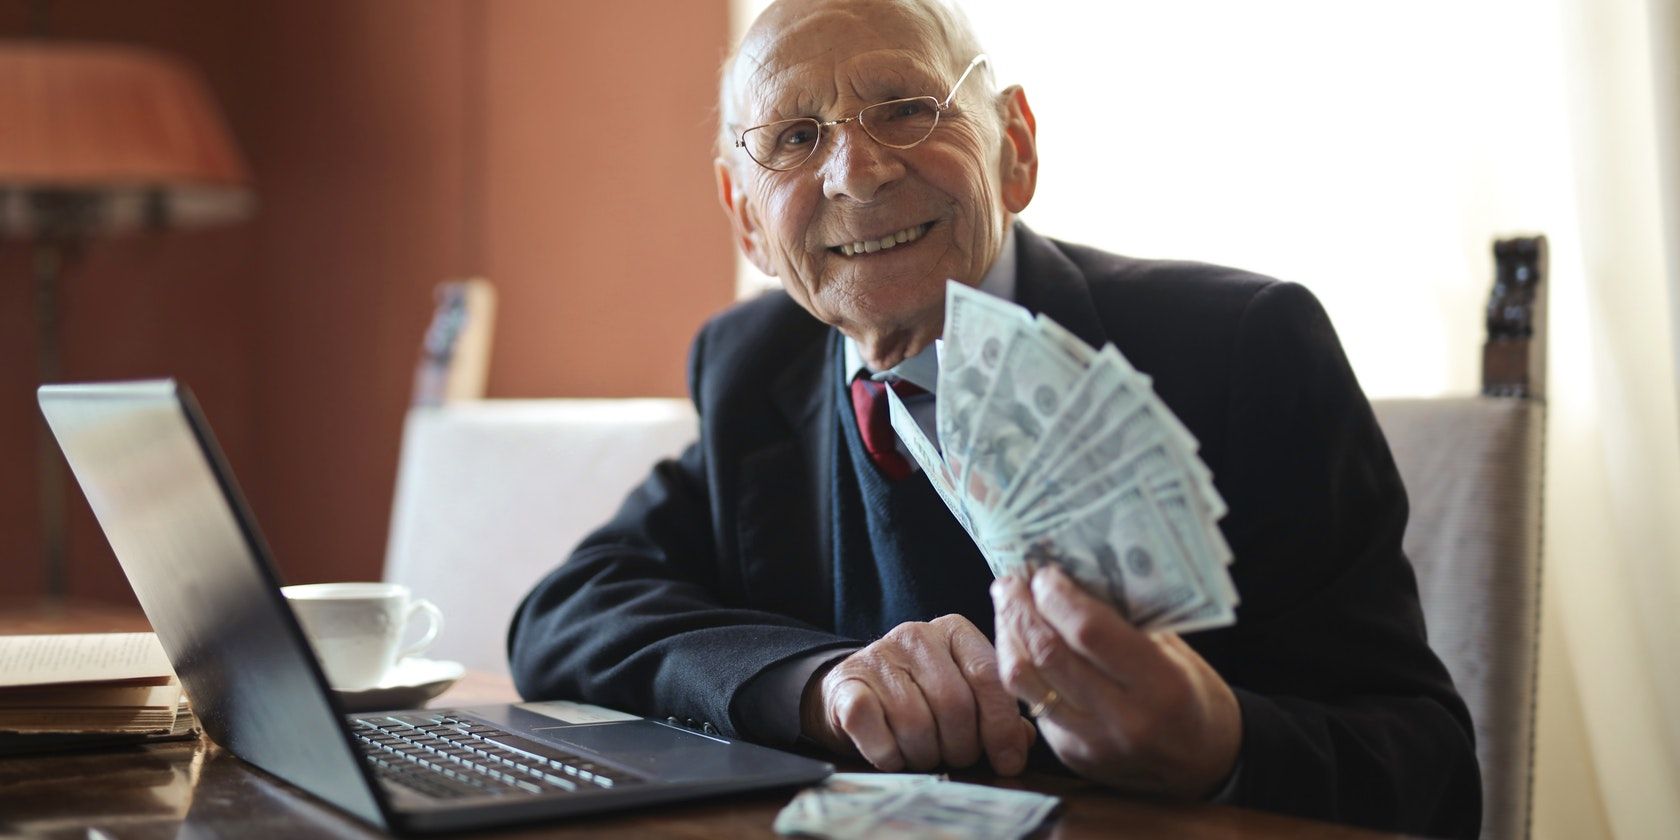 Photo of a man holding money in his hand Next to a Laptop